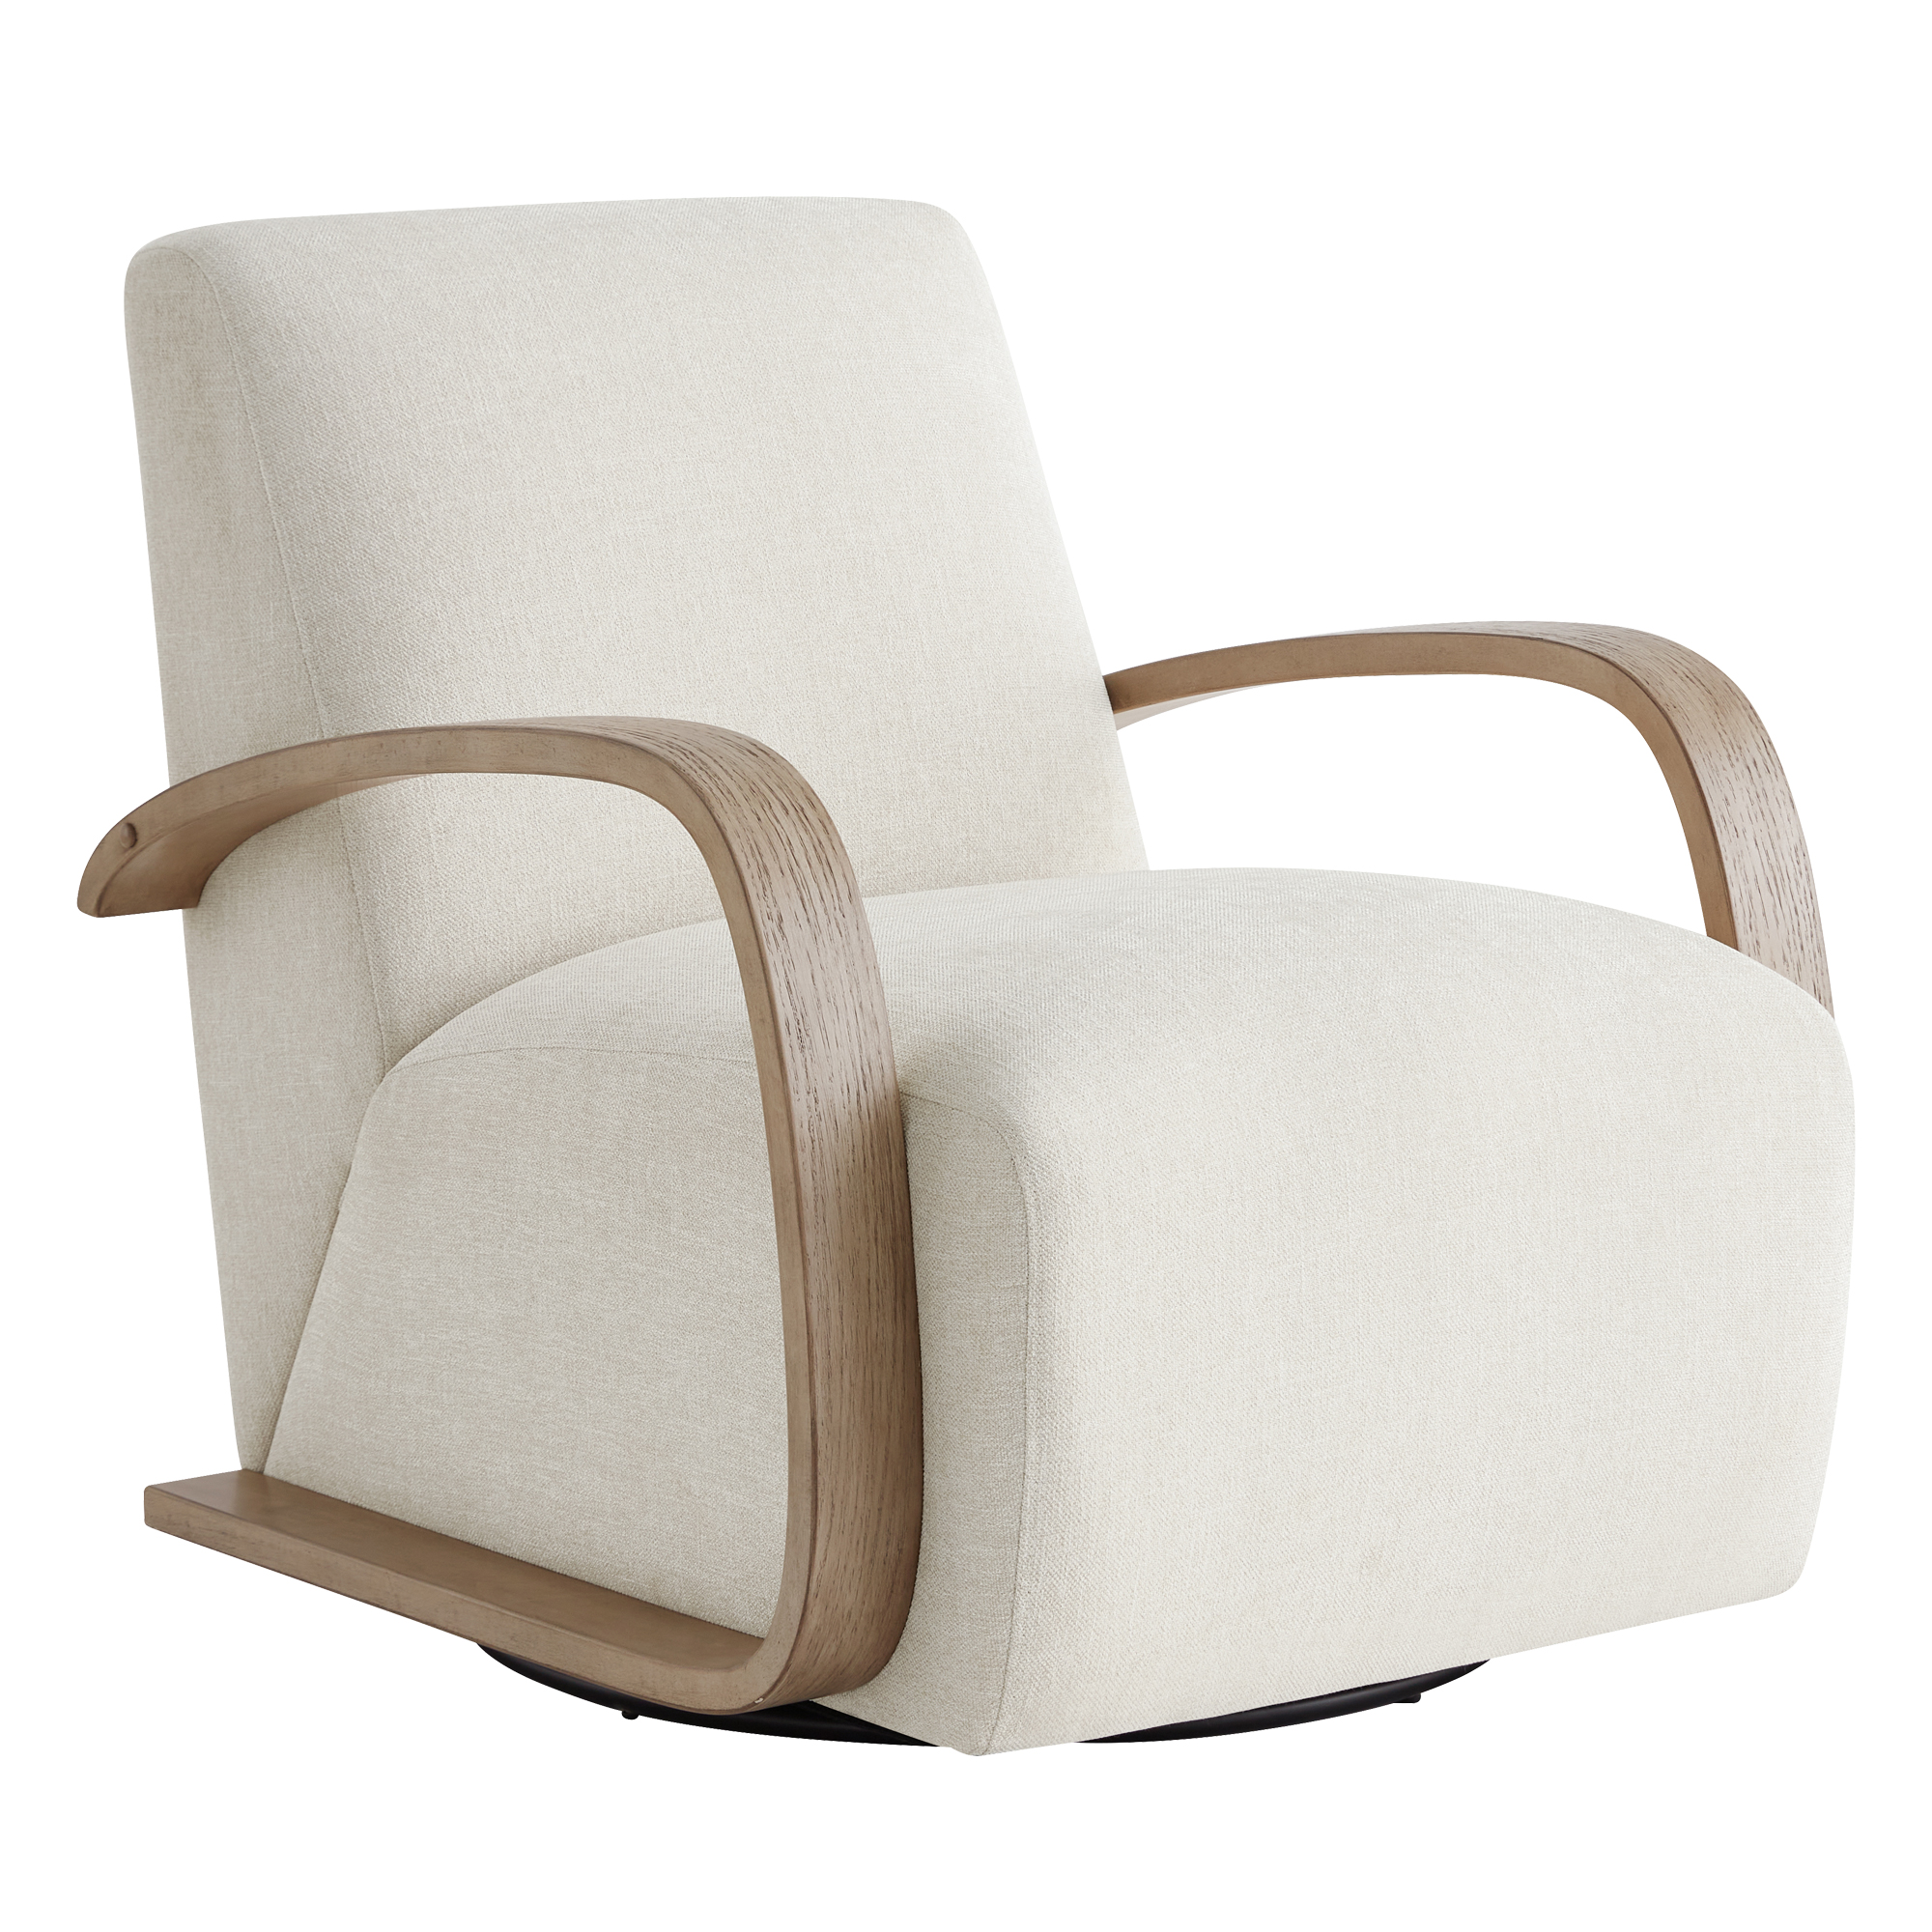 CHITA Swivel Accent Chair with U-shaped Wood Arm for Living Room Beedroom, Linen & Gray Wood - image 4 of 9